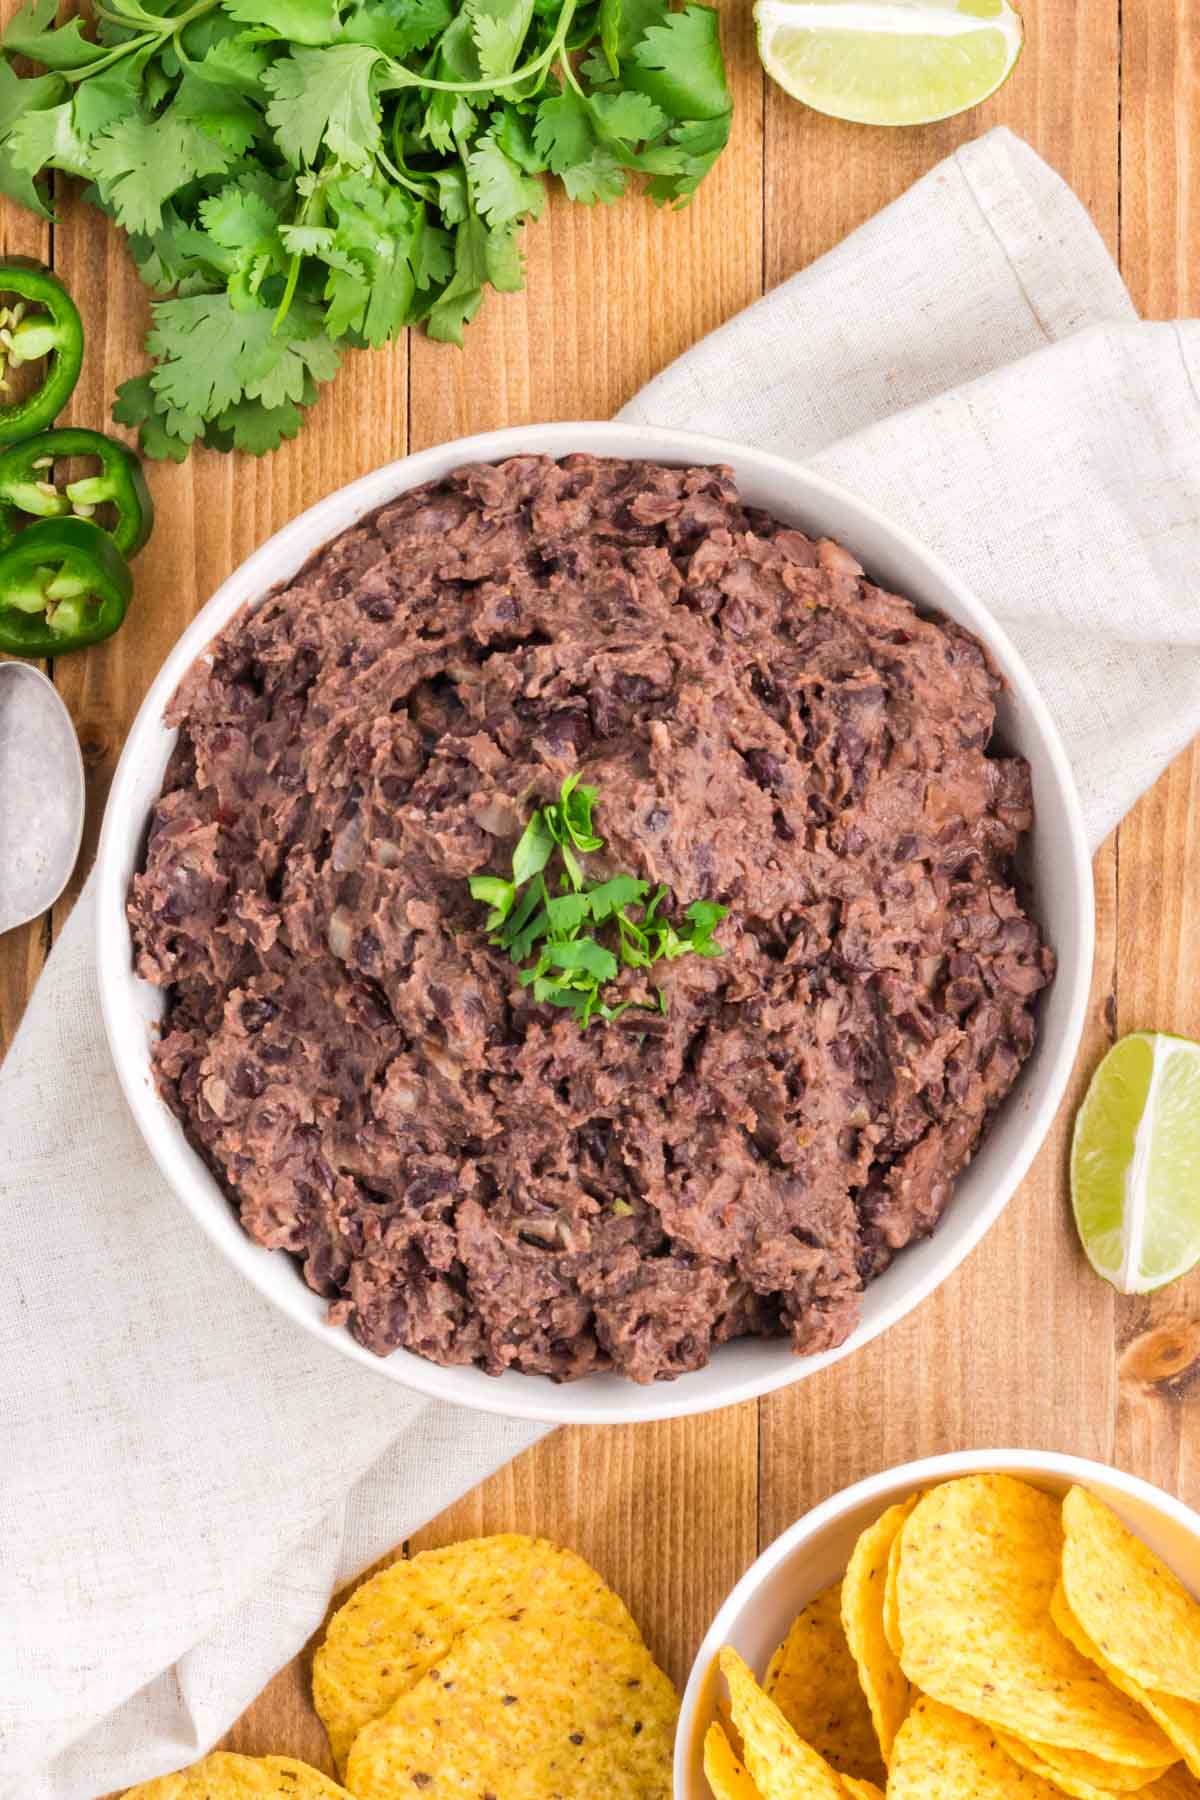 A table is set with a bowl of chips and and other garnishes surrounding a serving bowl of Refried Black Beans.